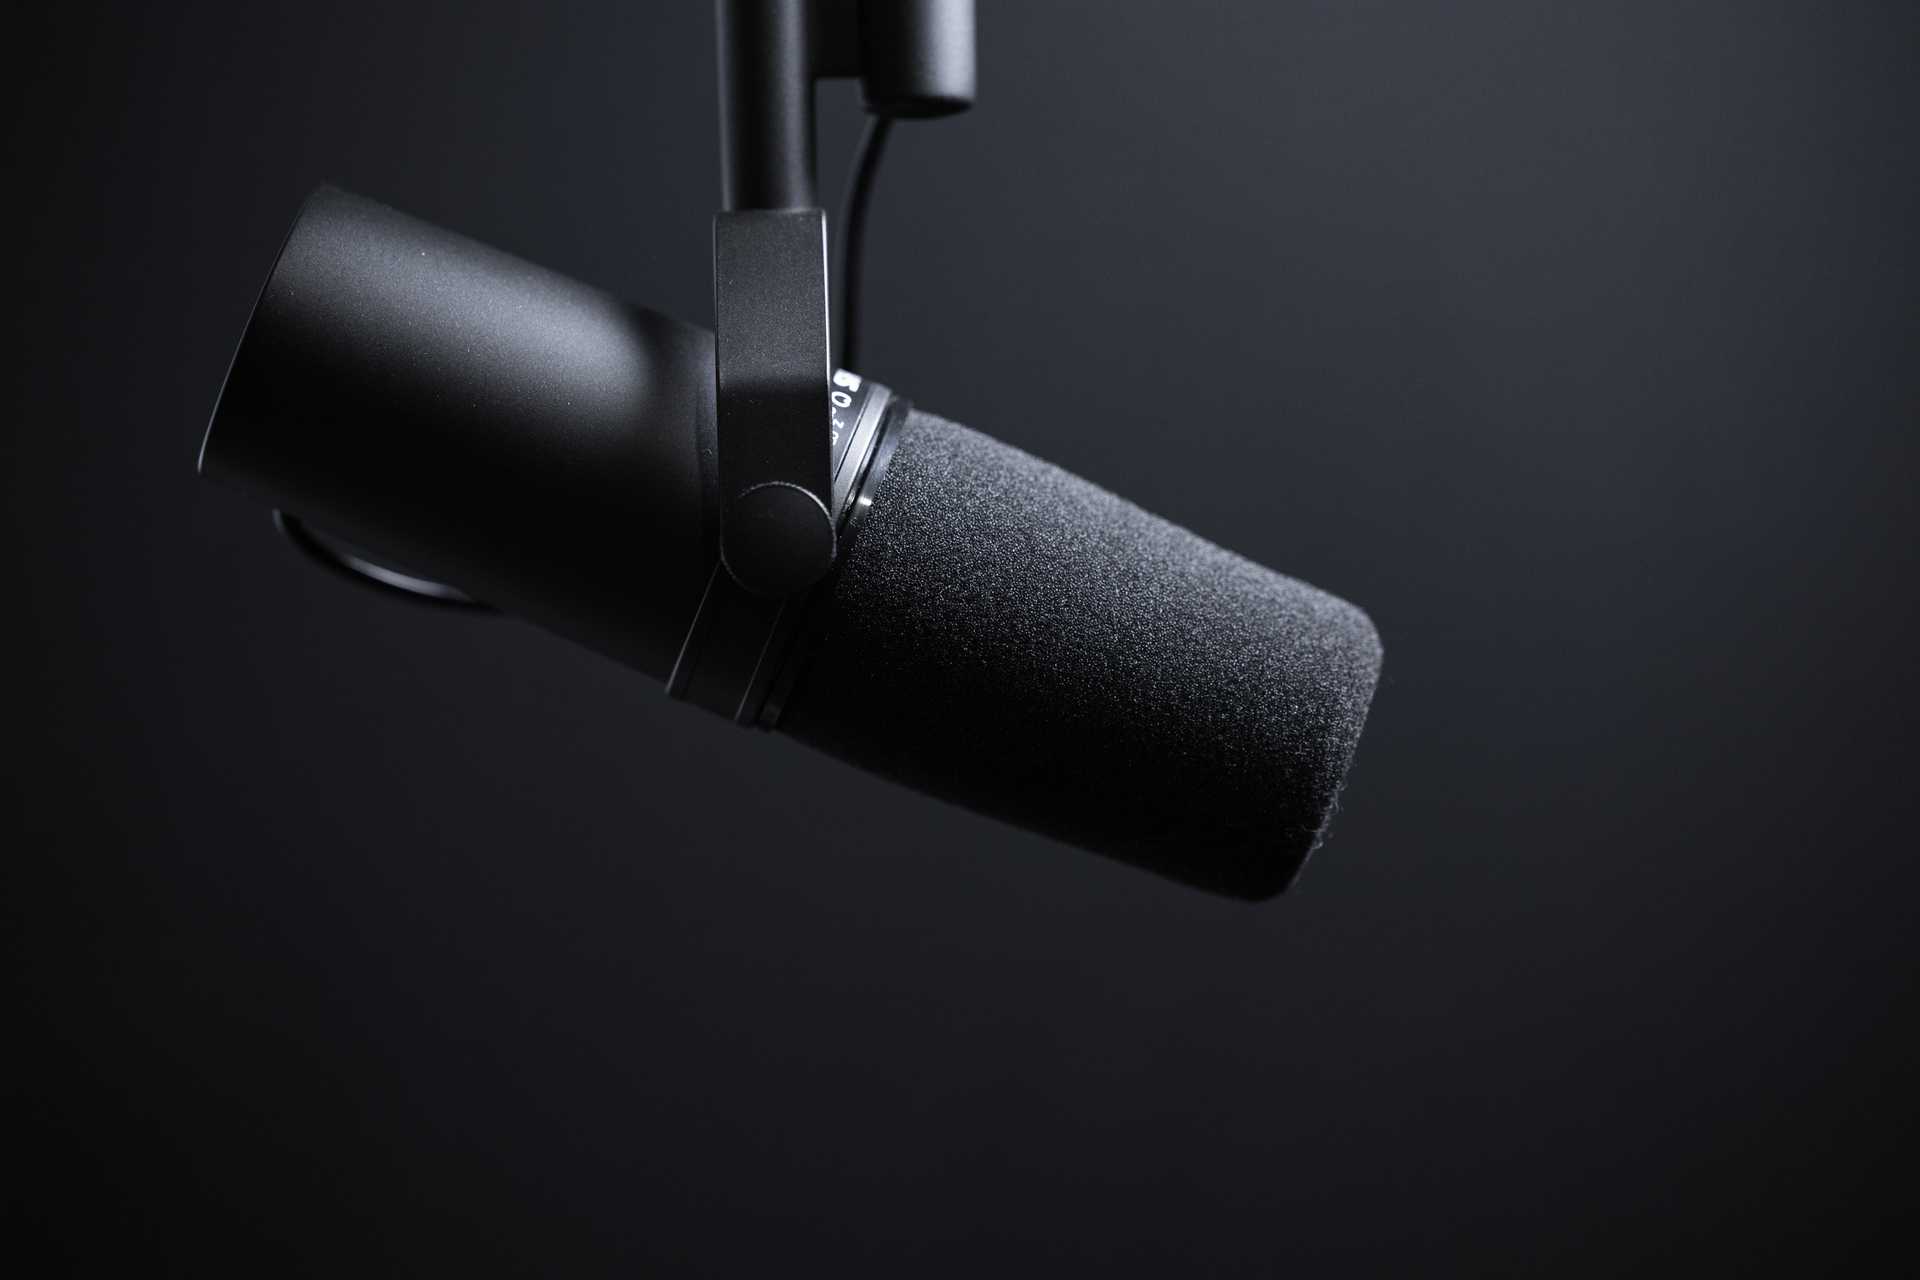 Introducing The Thinkful Flaskcast! featured image